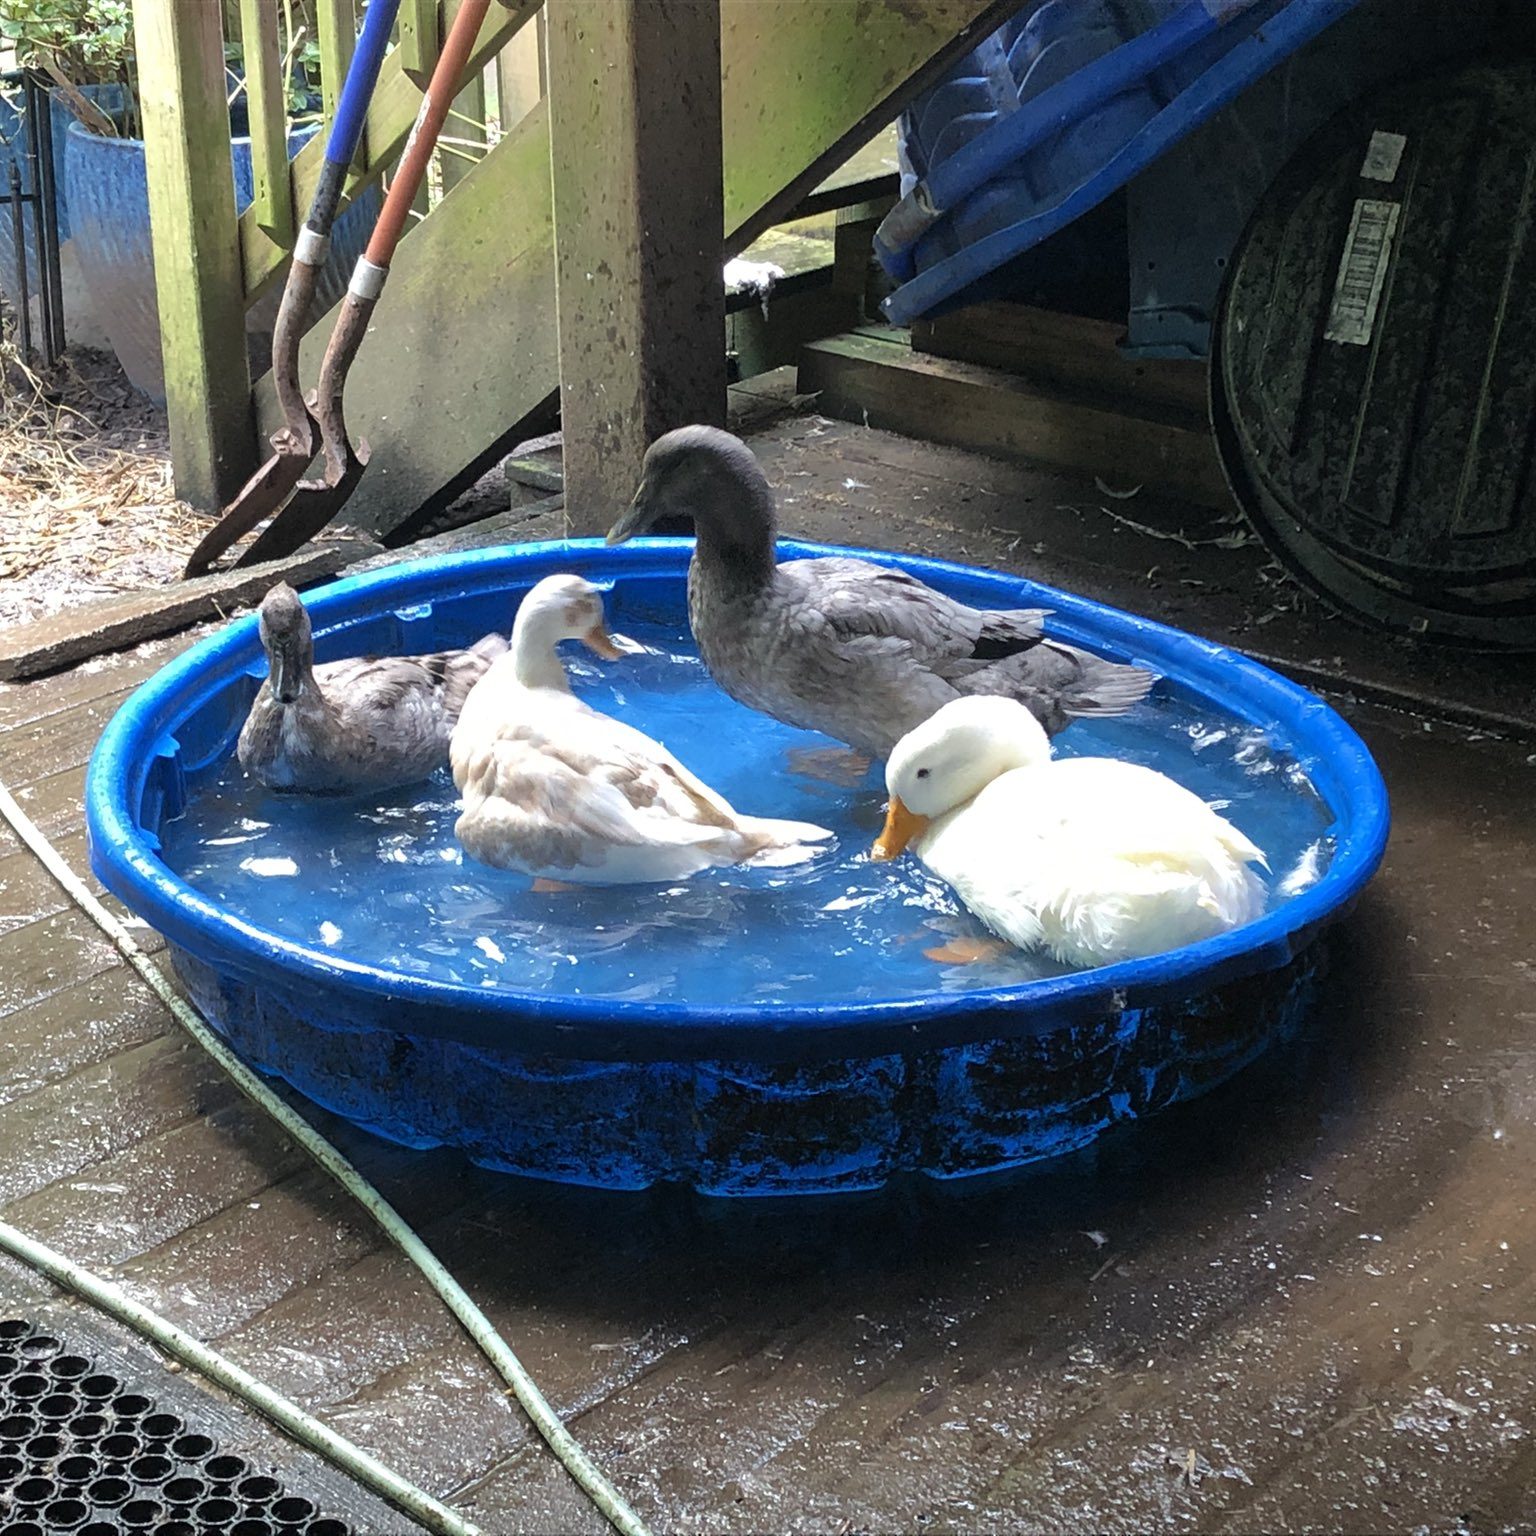 Four ducks in a wadding pool